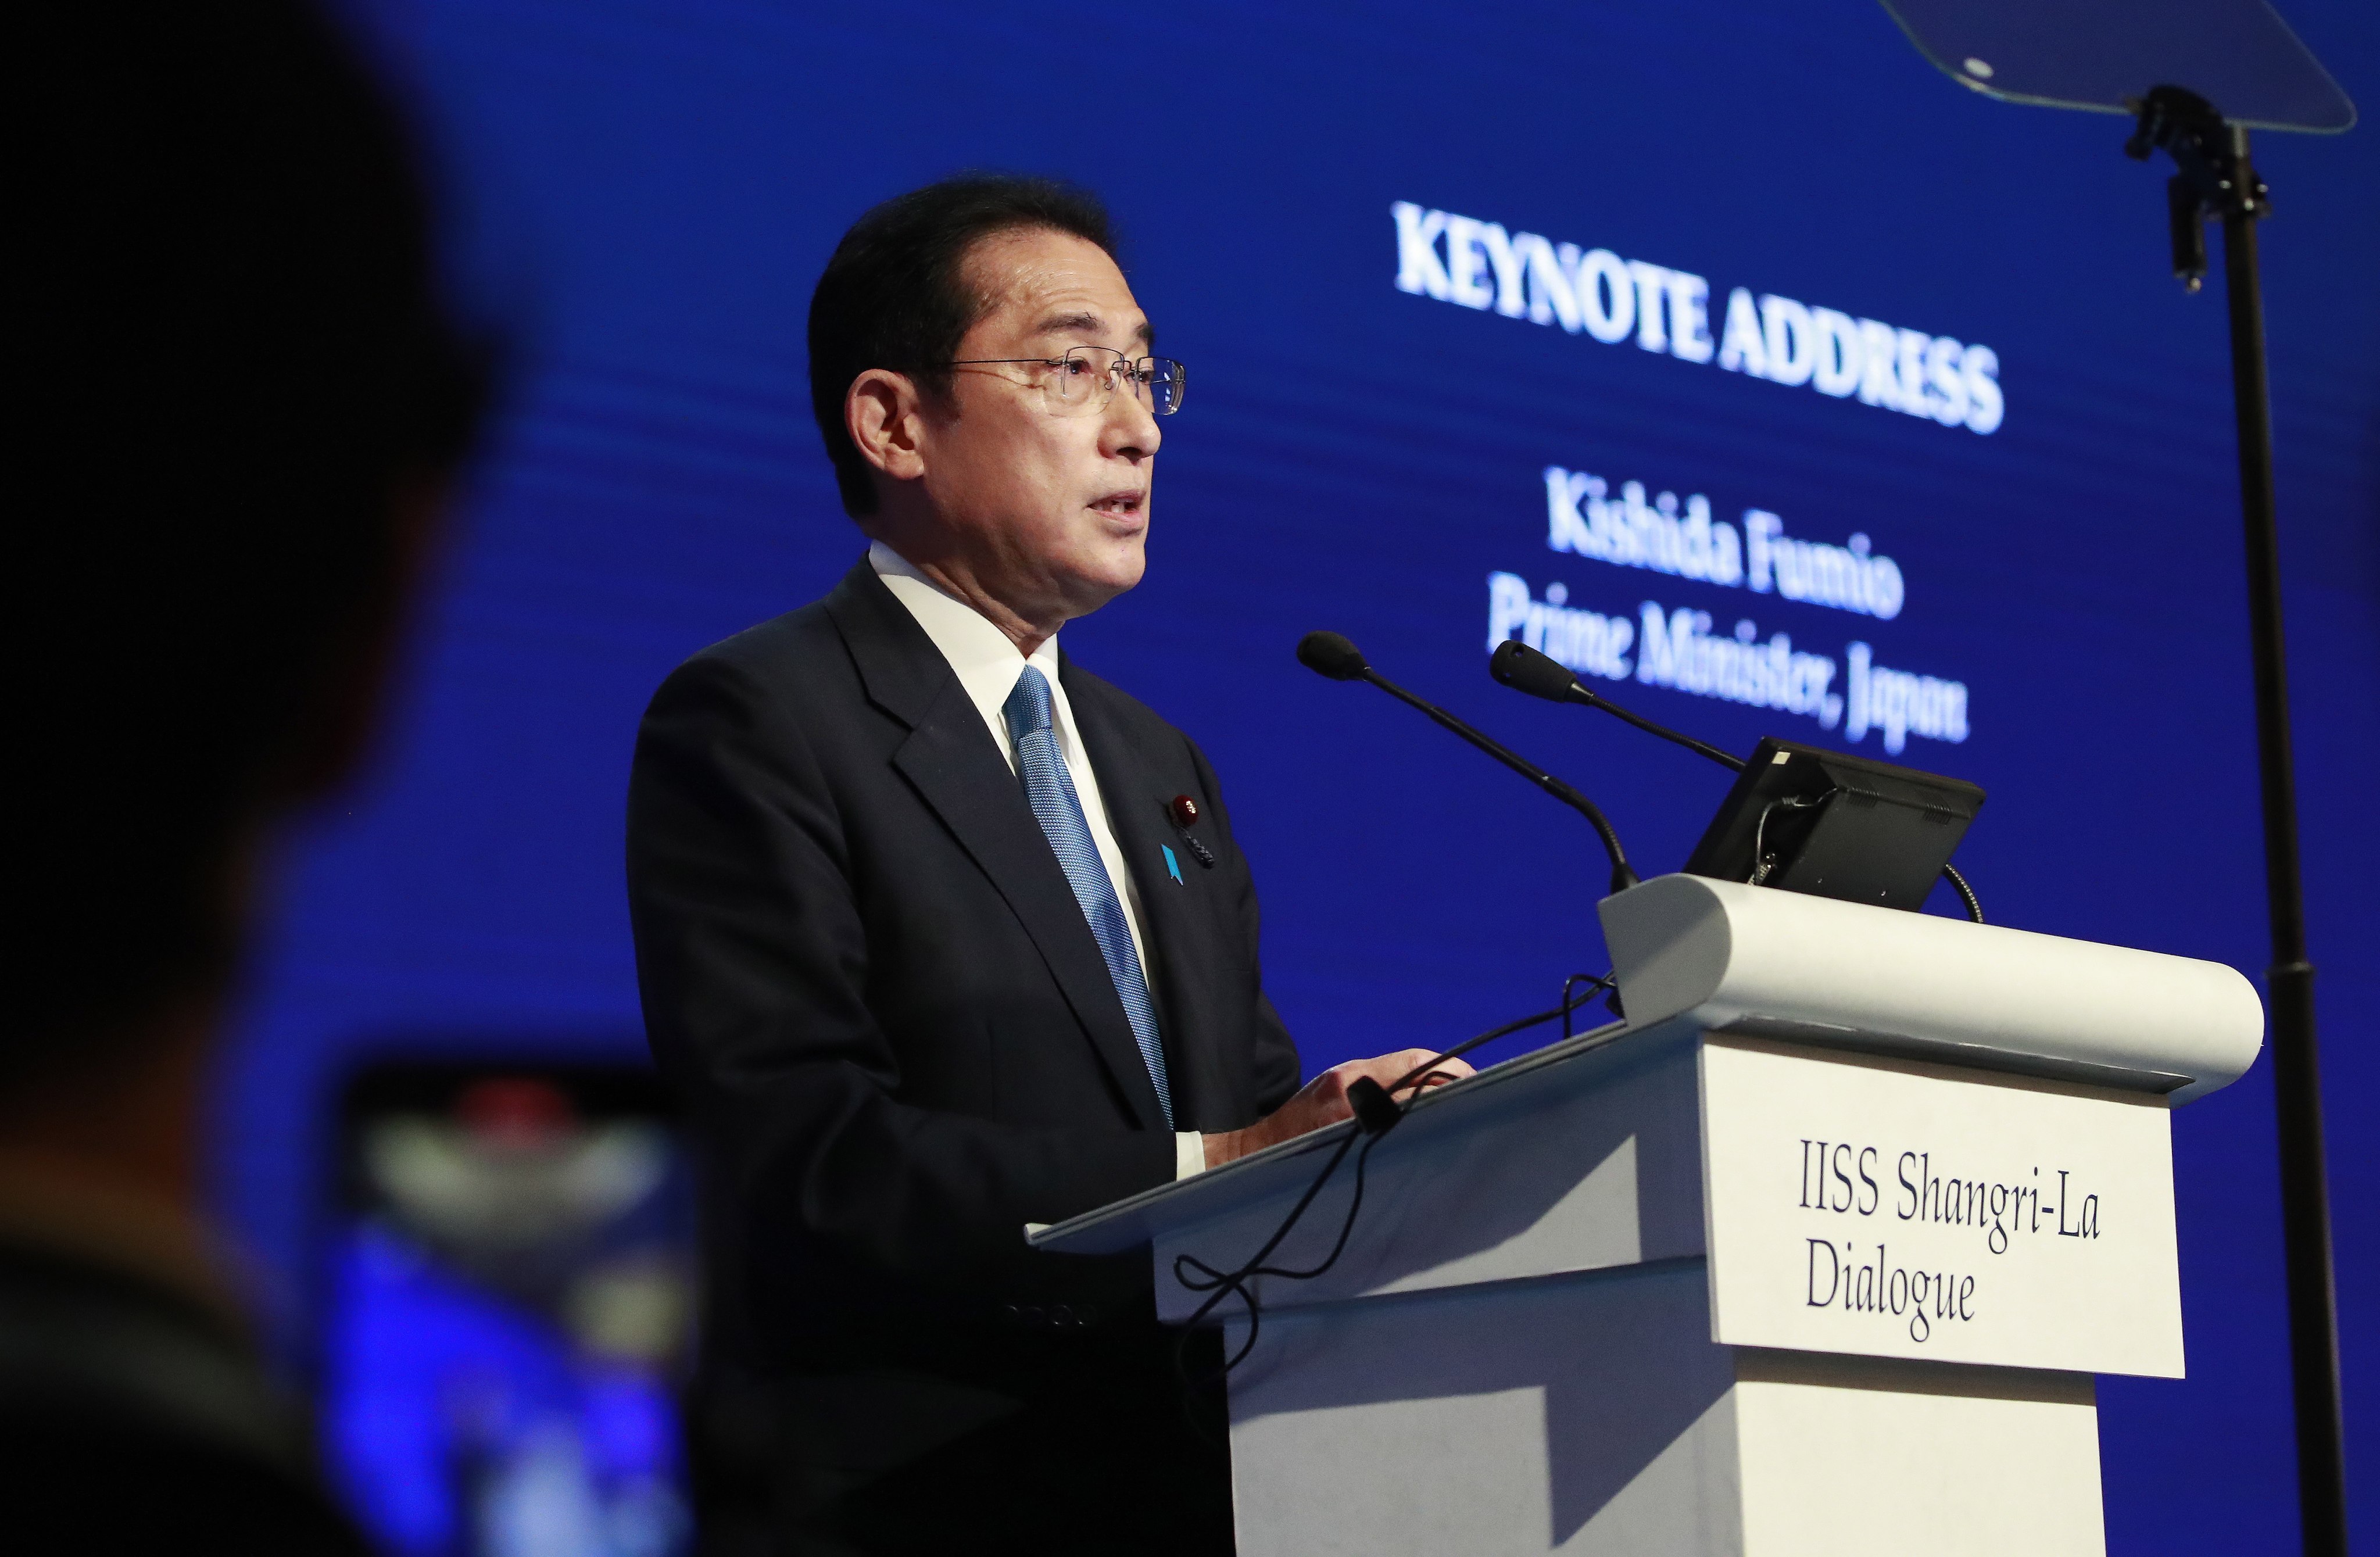 Japan’s Prime Minister Fumio Kishida delivers his keynote address during the International Institute for Strategic Studies (IISS) Shangri-la Dialogue in Singapore. Photo EPA-EFE/How Hwee Young